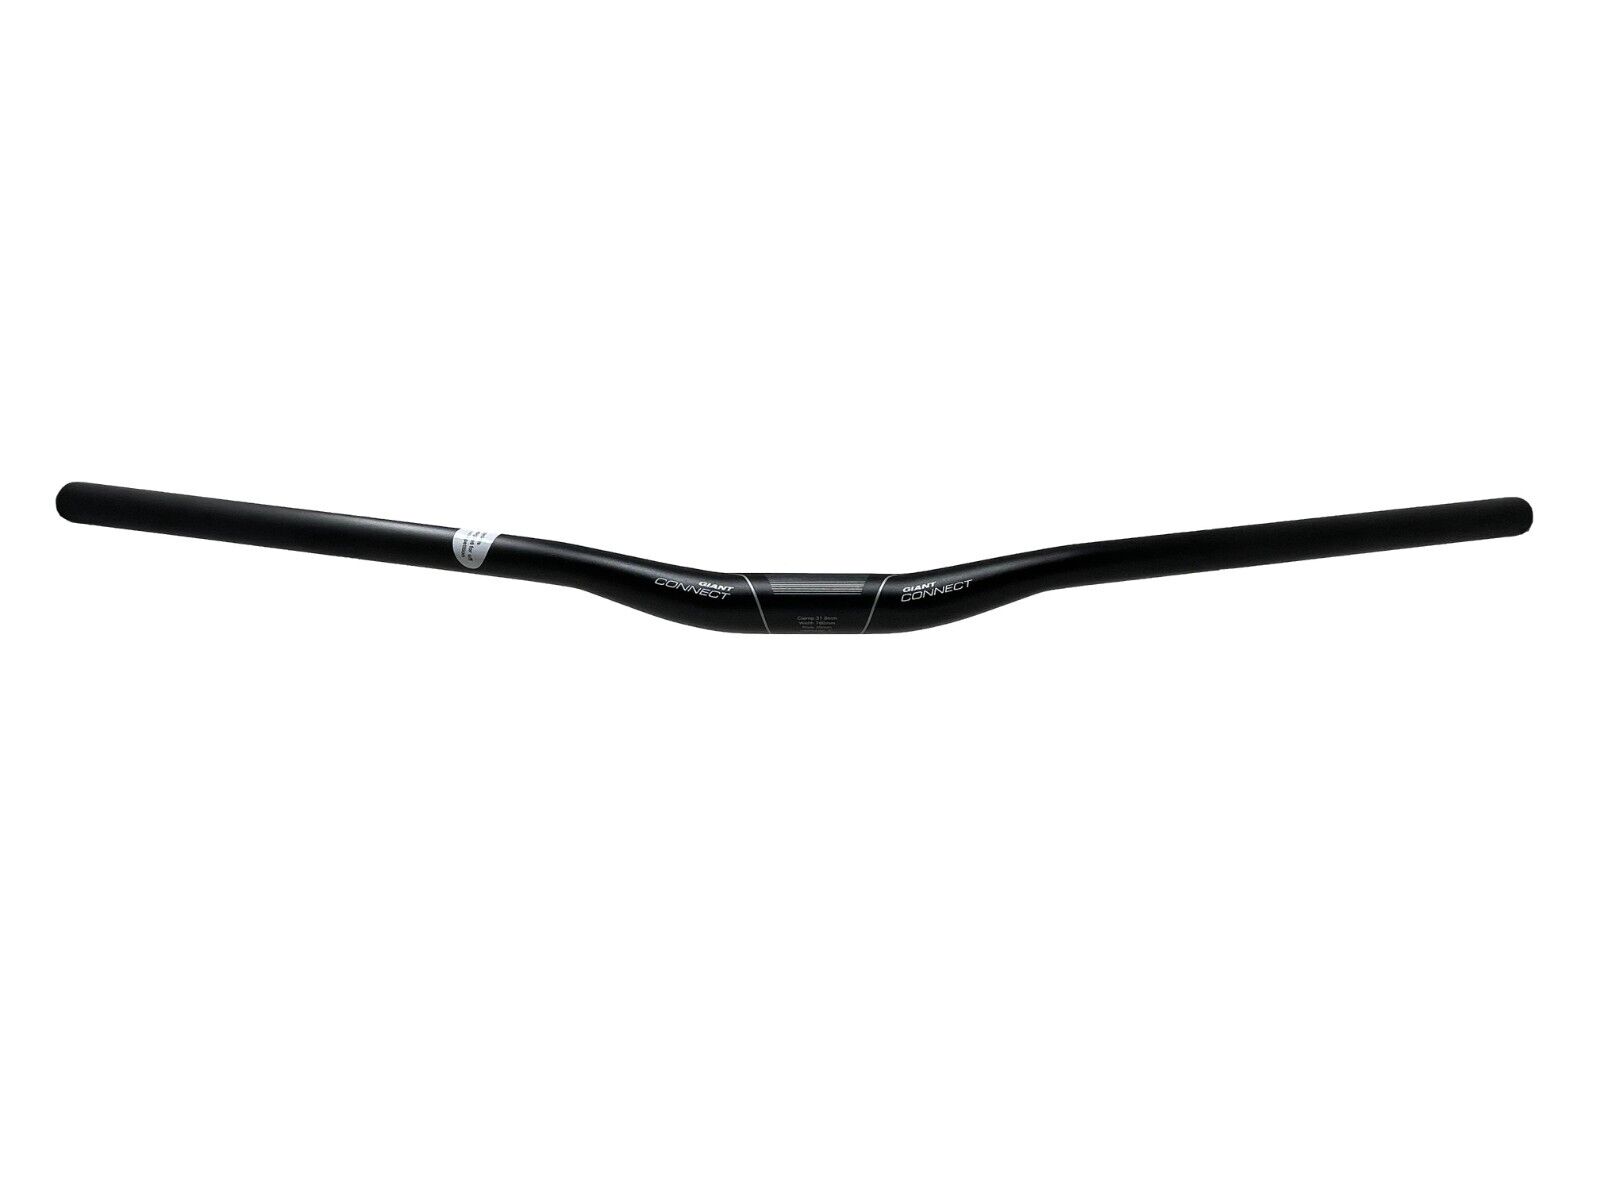 Giant Connect TR Riser Bar - 780mm - 20mm Rise  - 31.8mm Clamp - Sportandleisure.com